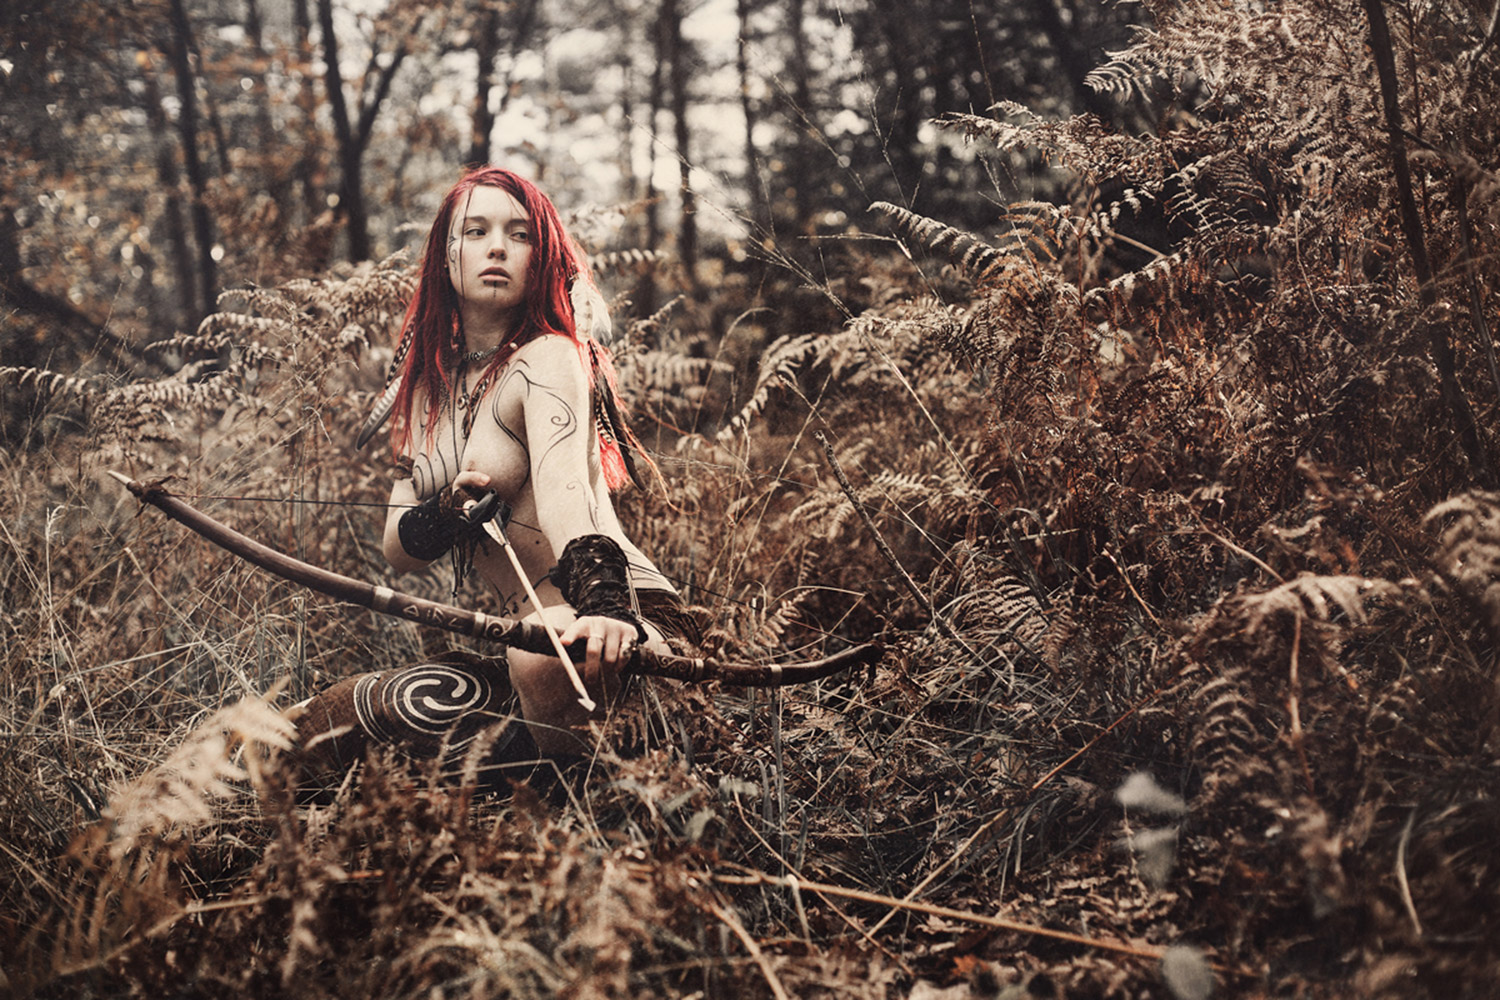 Charlotte Grimm - model Sam crouching with bow and arrow